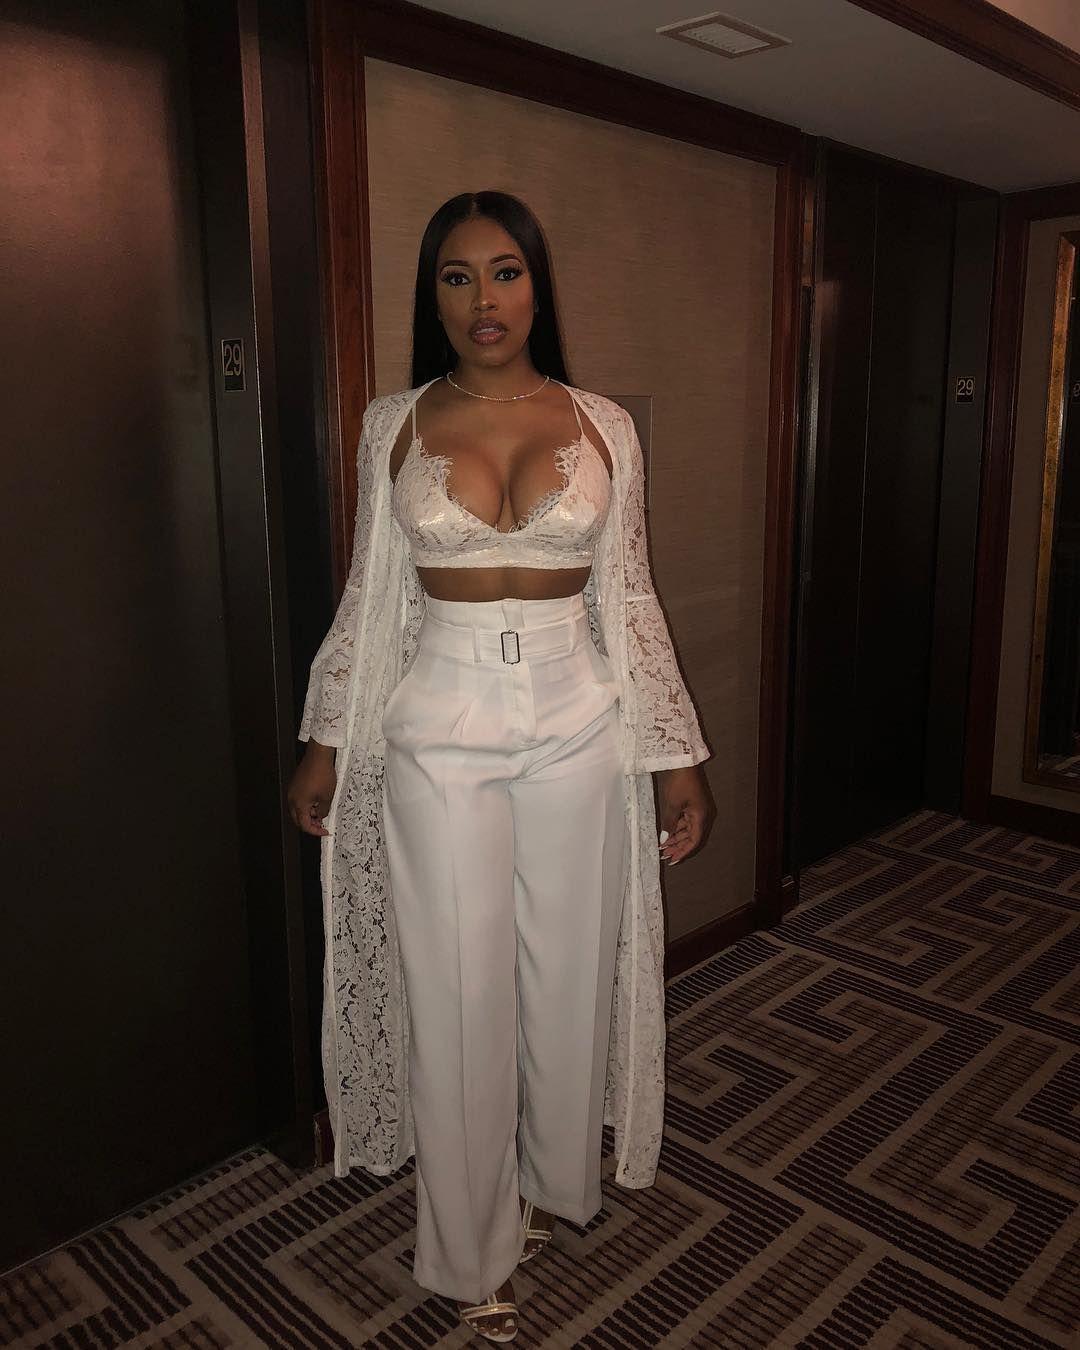 Meek Mill Pissed That BET Let Milan Rouge Perform At Awards Show, Embarrassed Them Both!